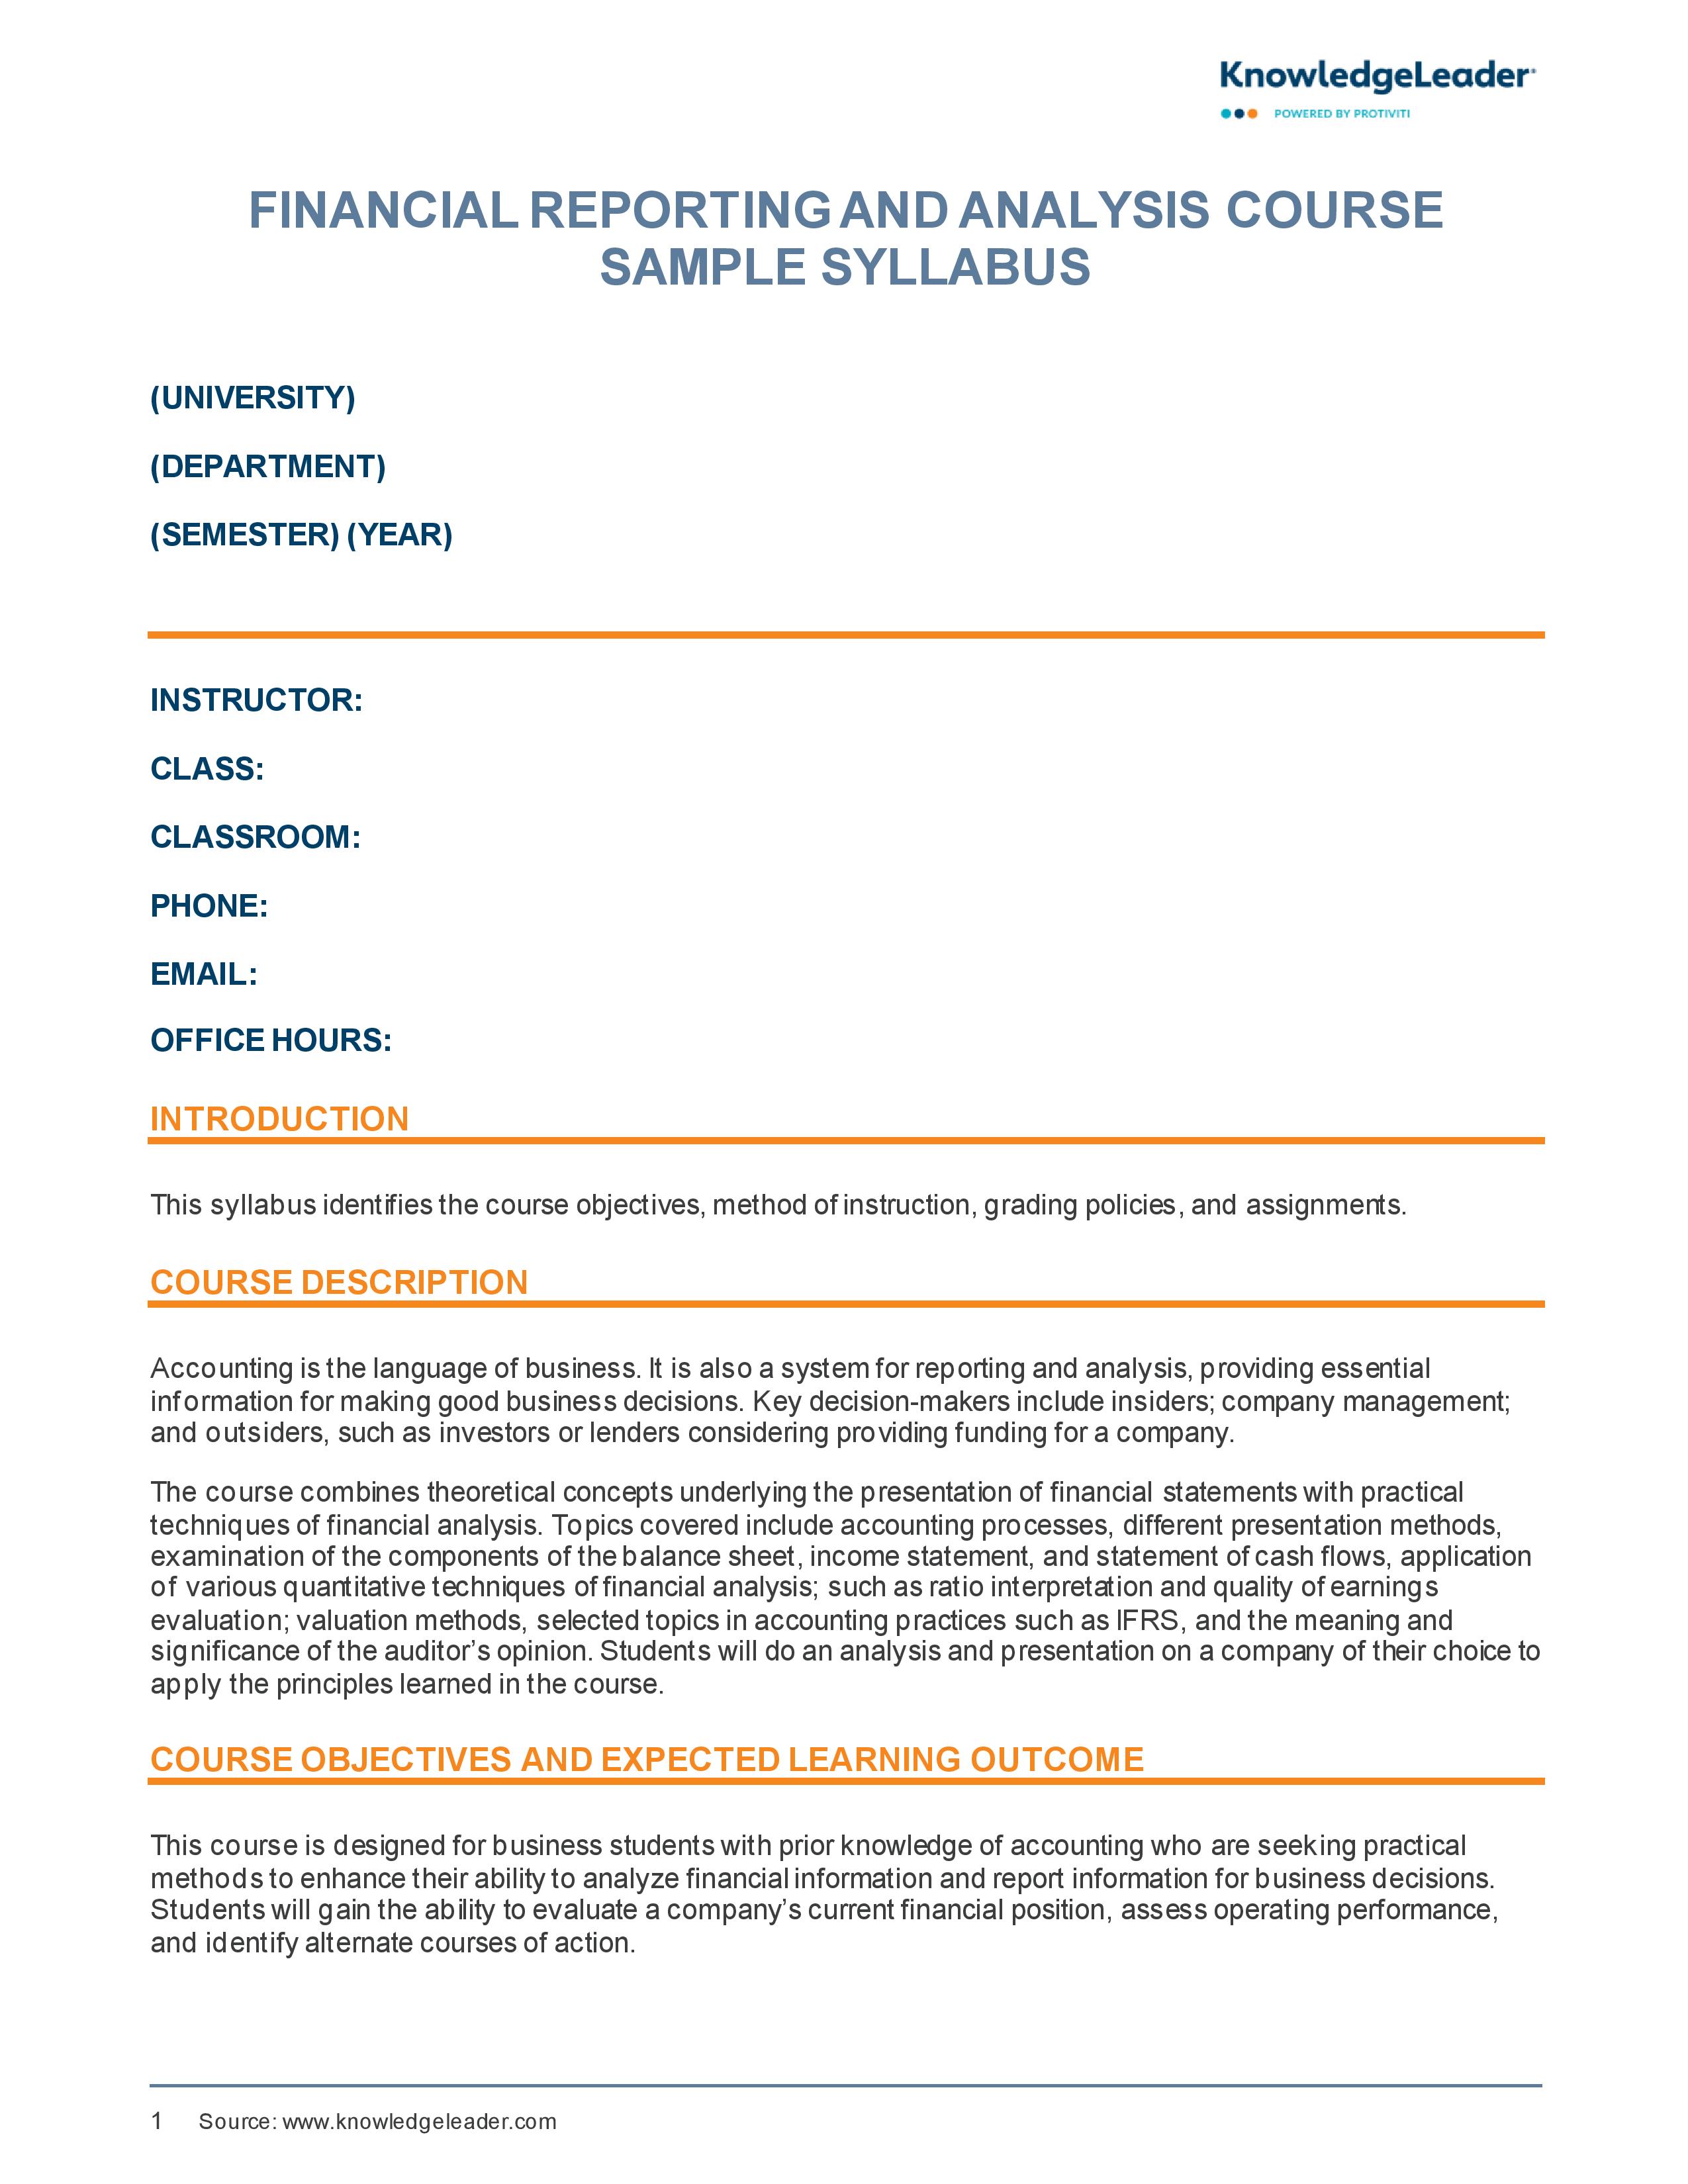 Screenshot of the first page of Financial Reporting & Analysis Sample Syllabus